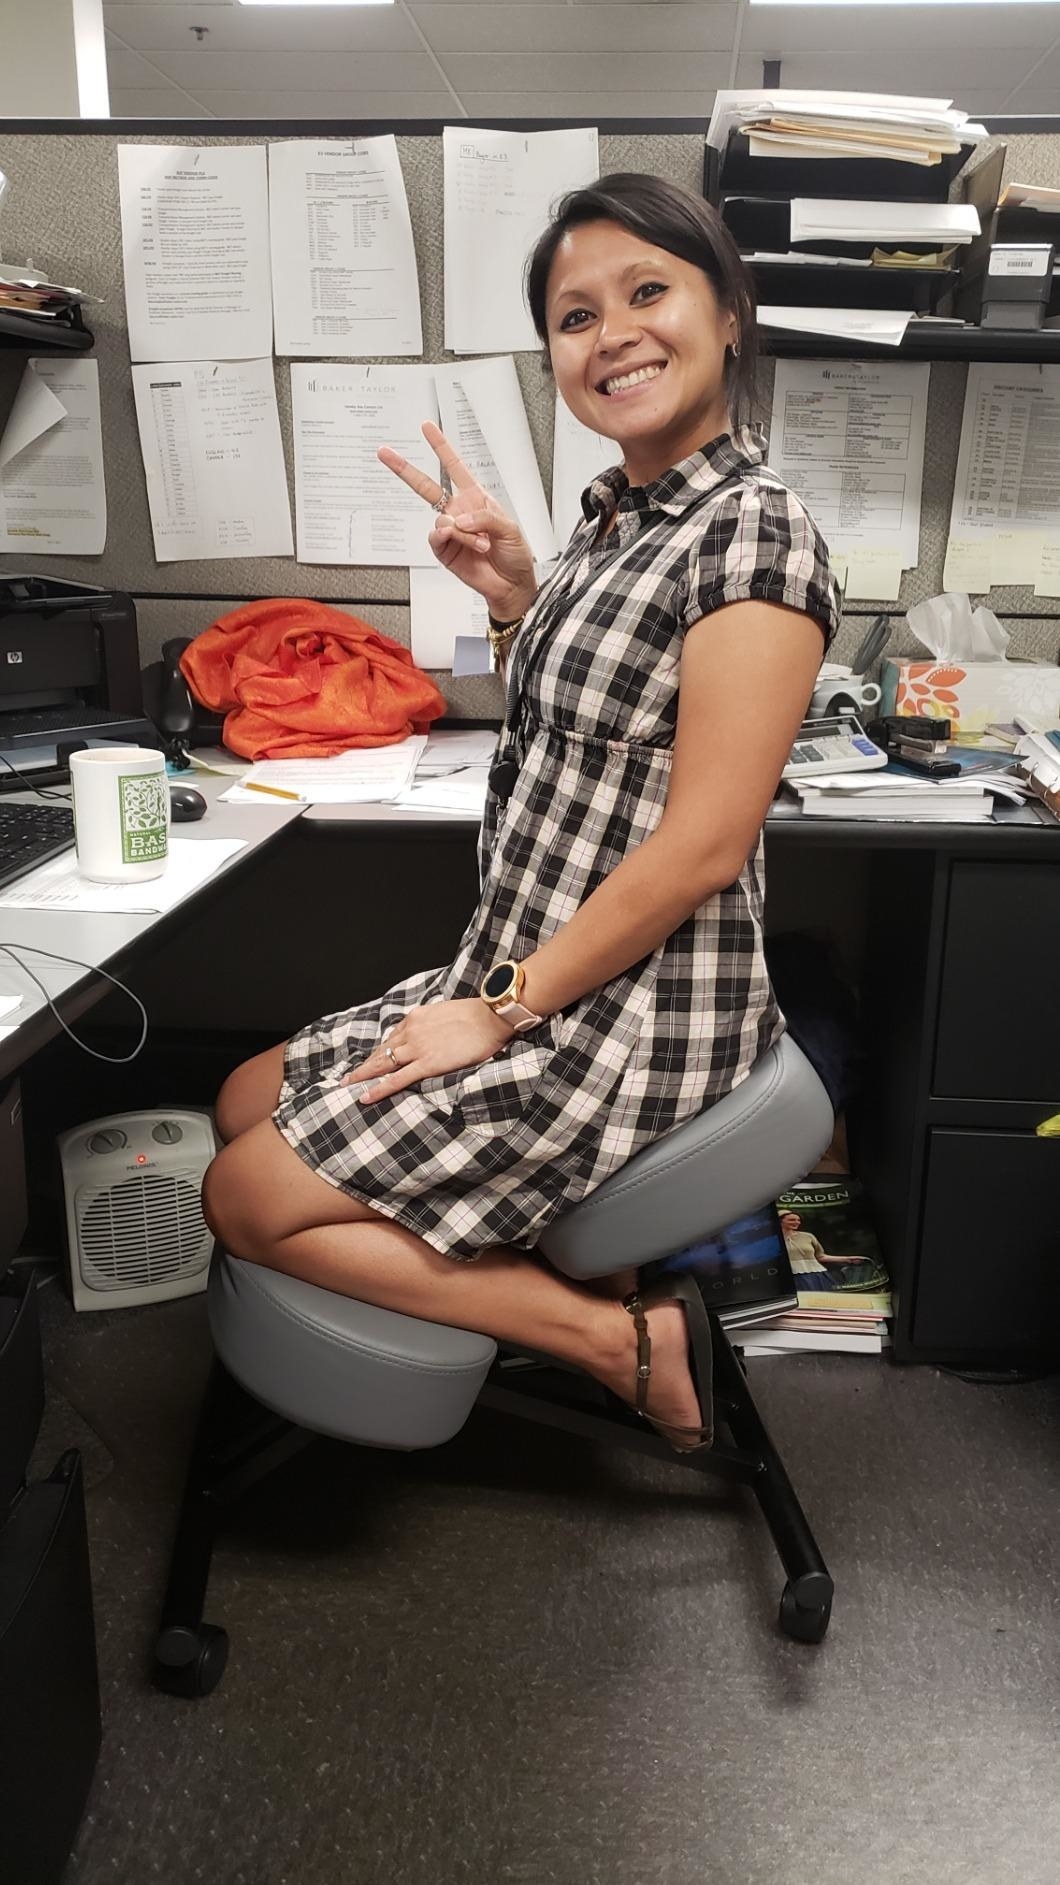 reviewer posing while kneeling on ergonomic chair